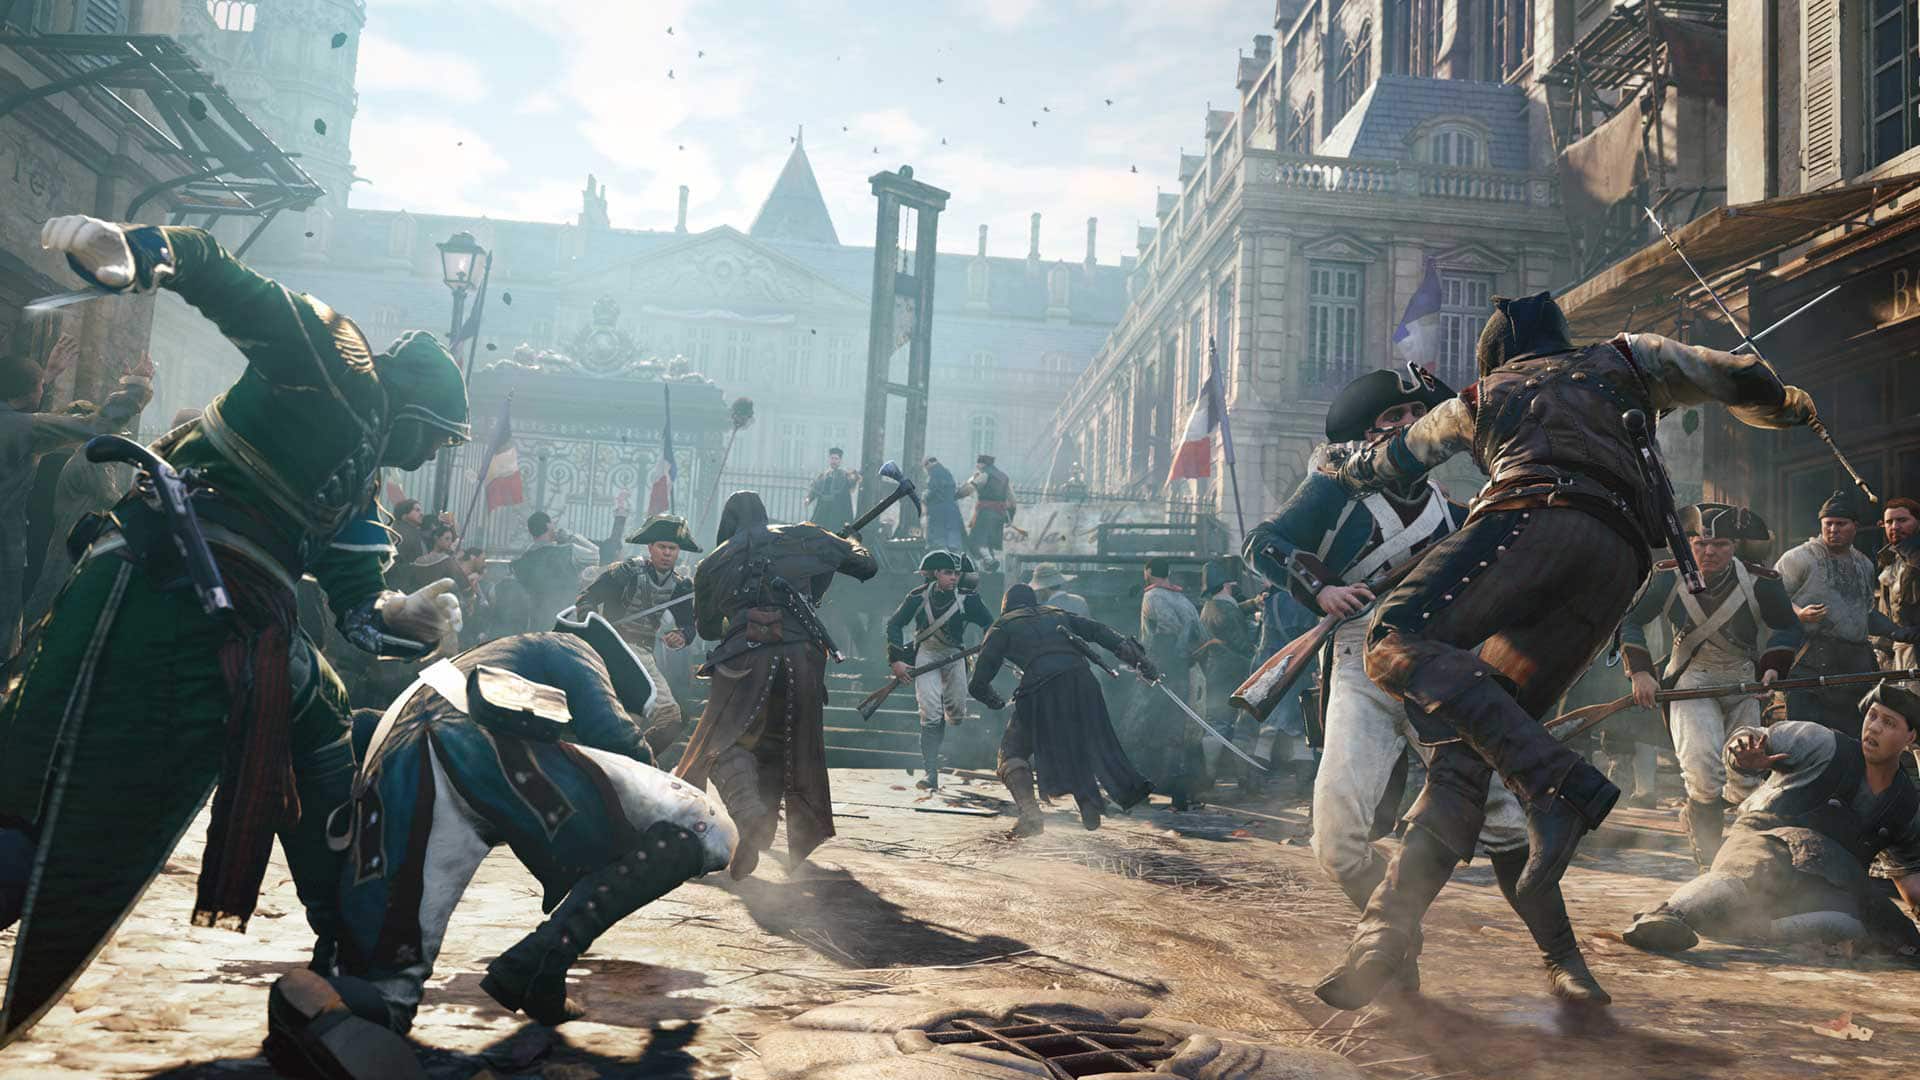 Ubisoft Donates $562,000 To Help Rebuild Notre Dame Cathedral And Offers Assassin’s Creed Unity For Free